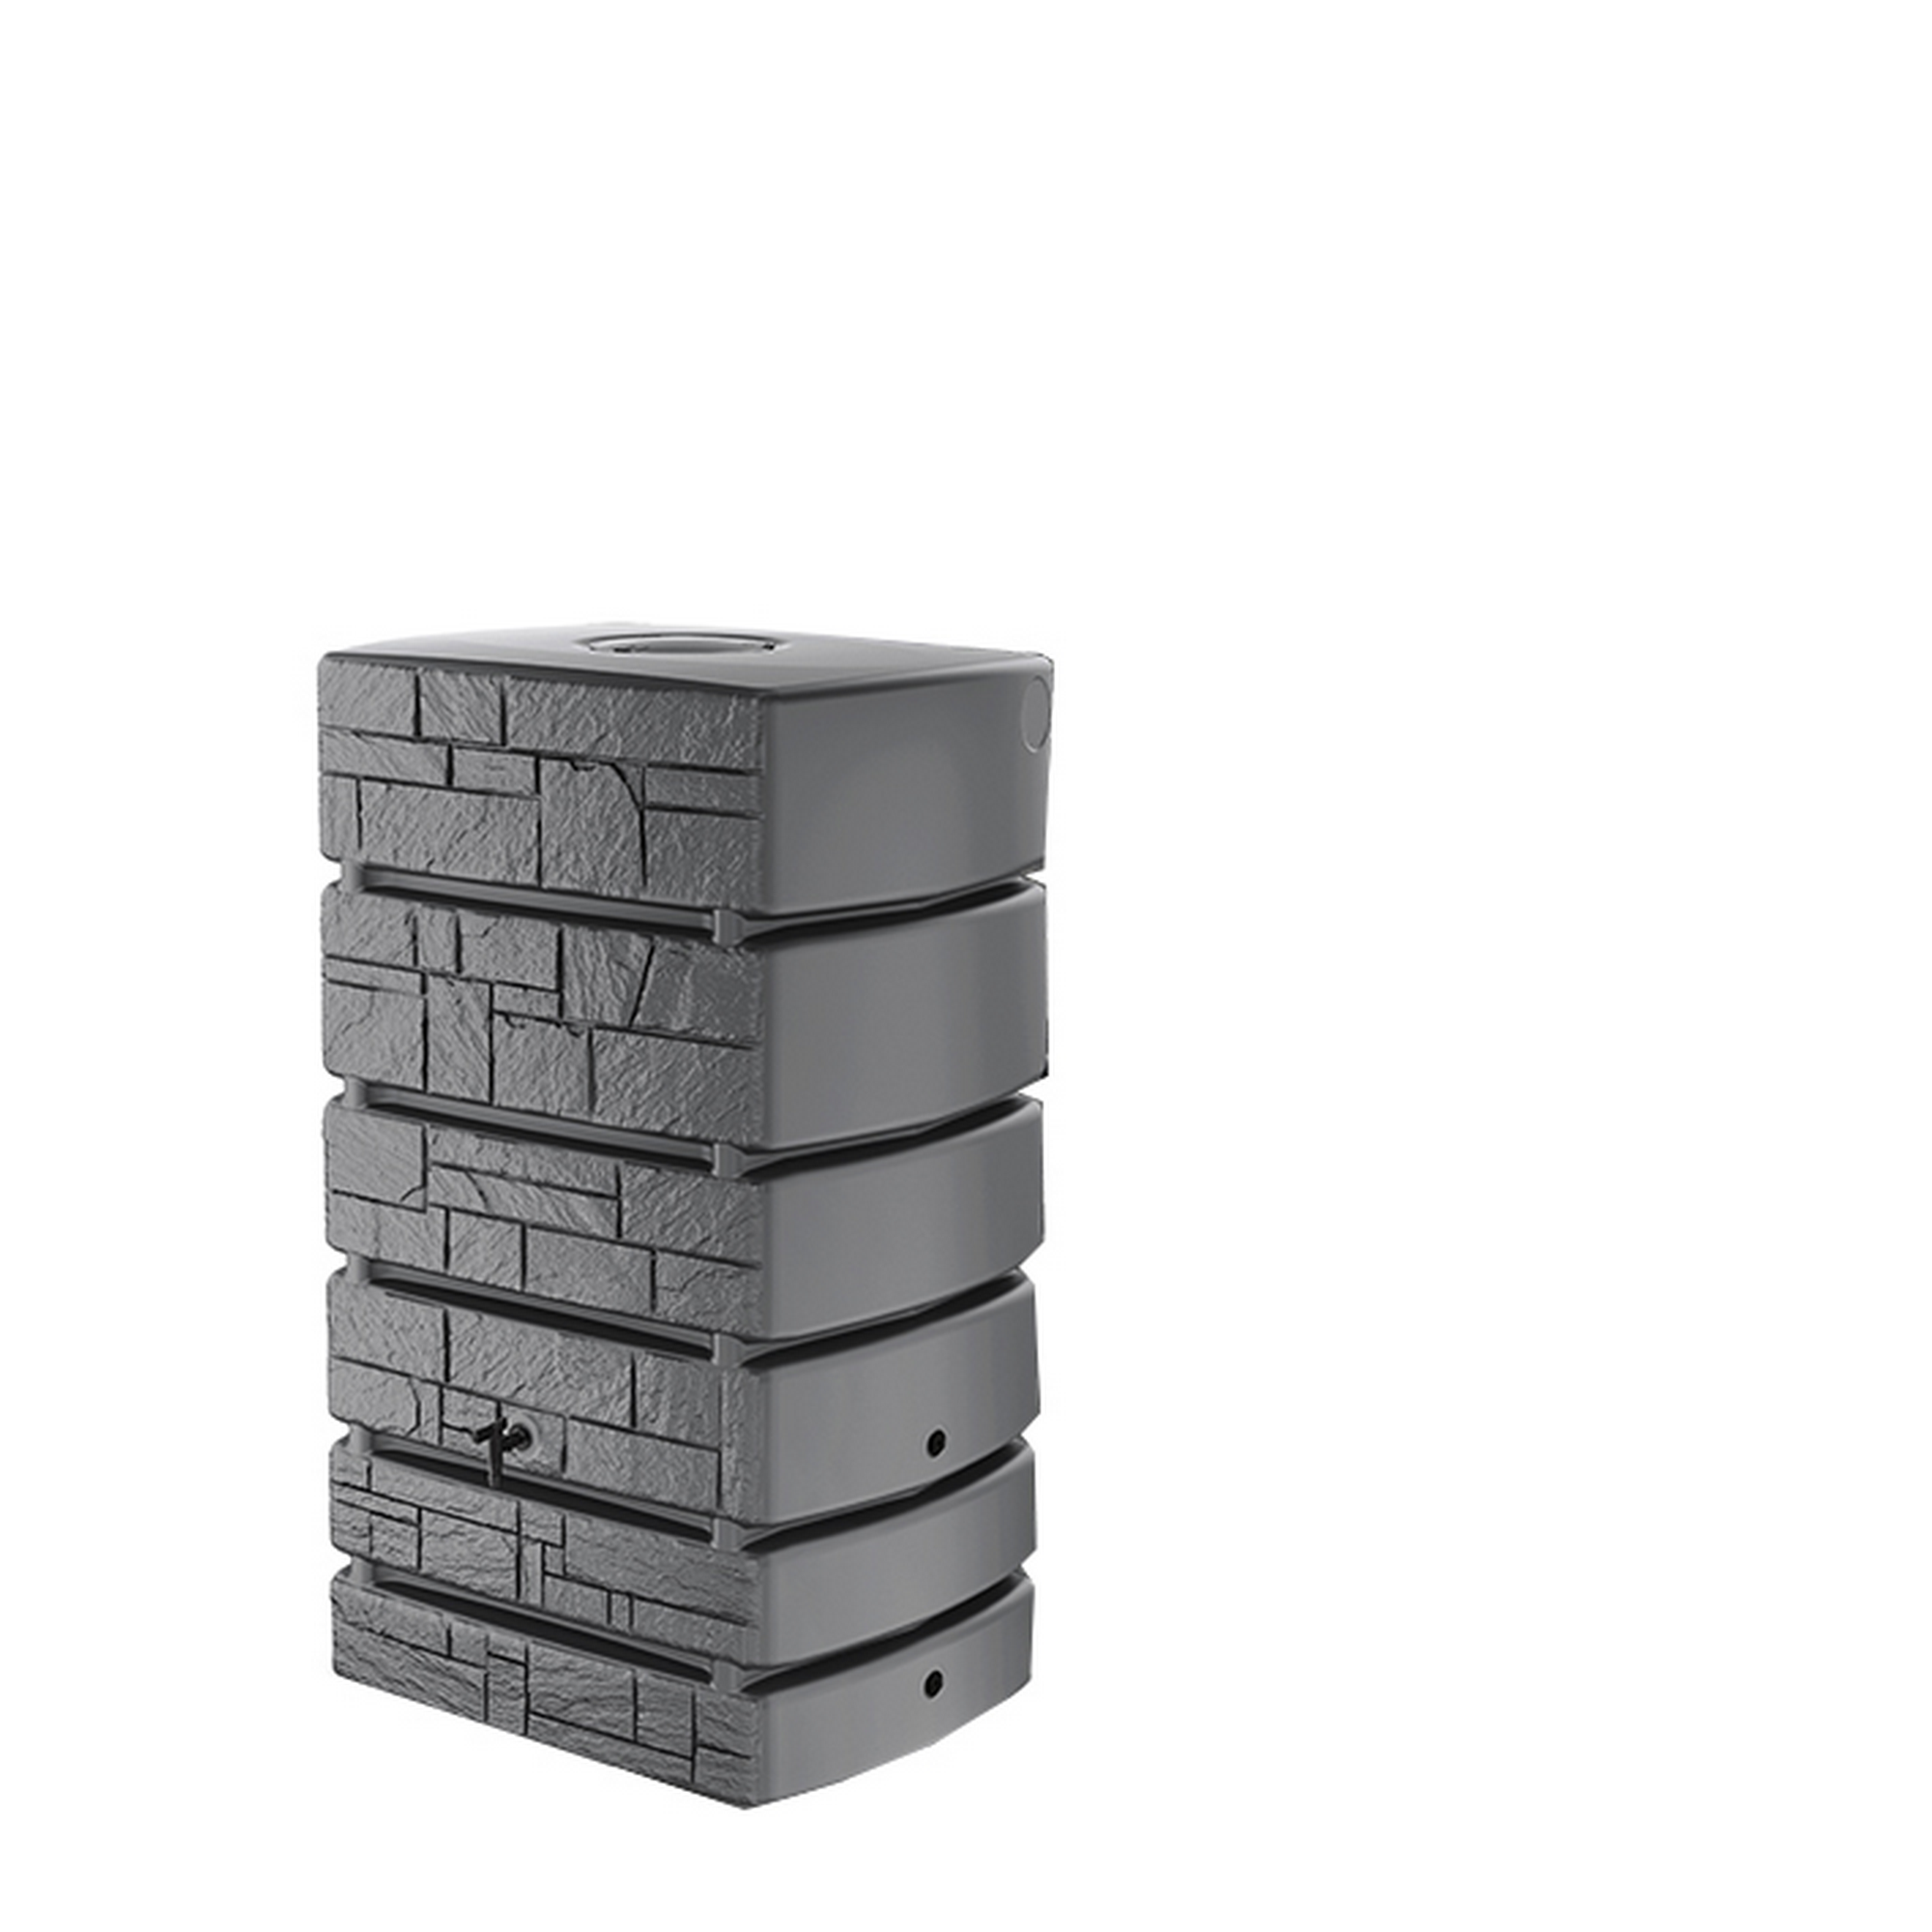 Wandtank 'Tower Stone' grau 500 l + product picture